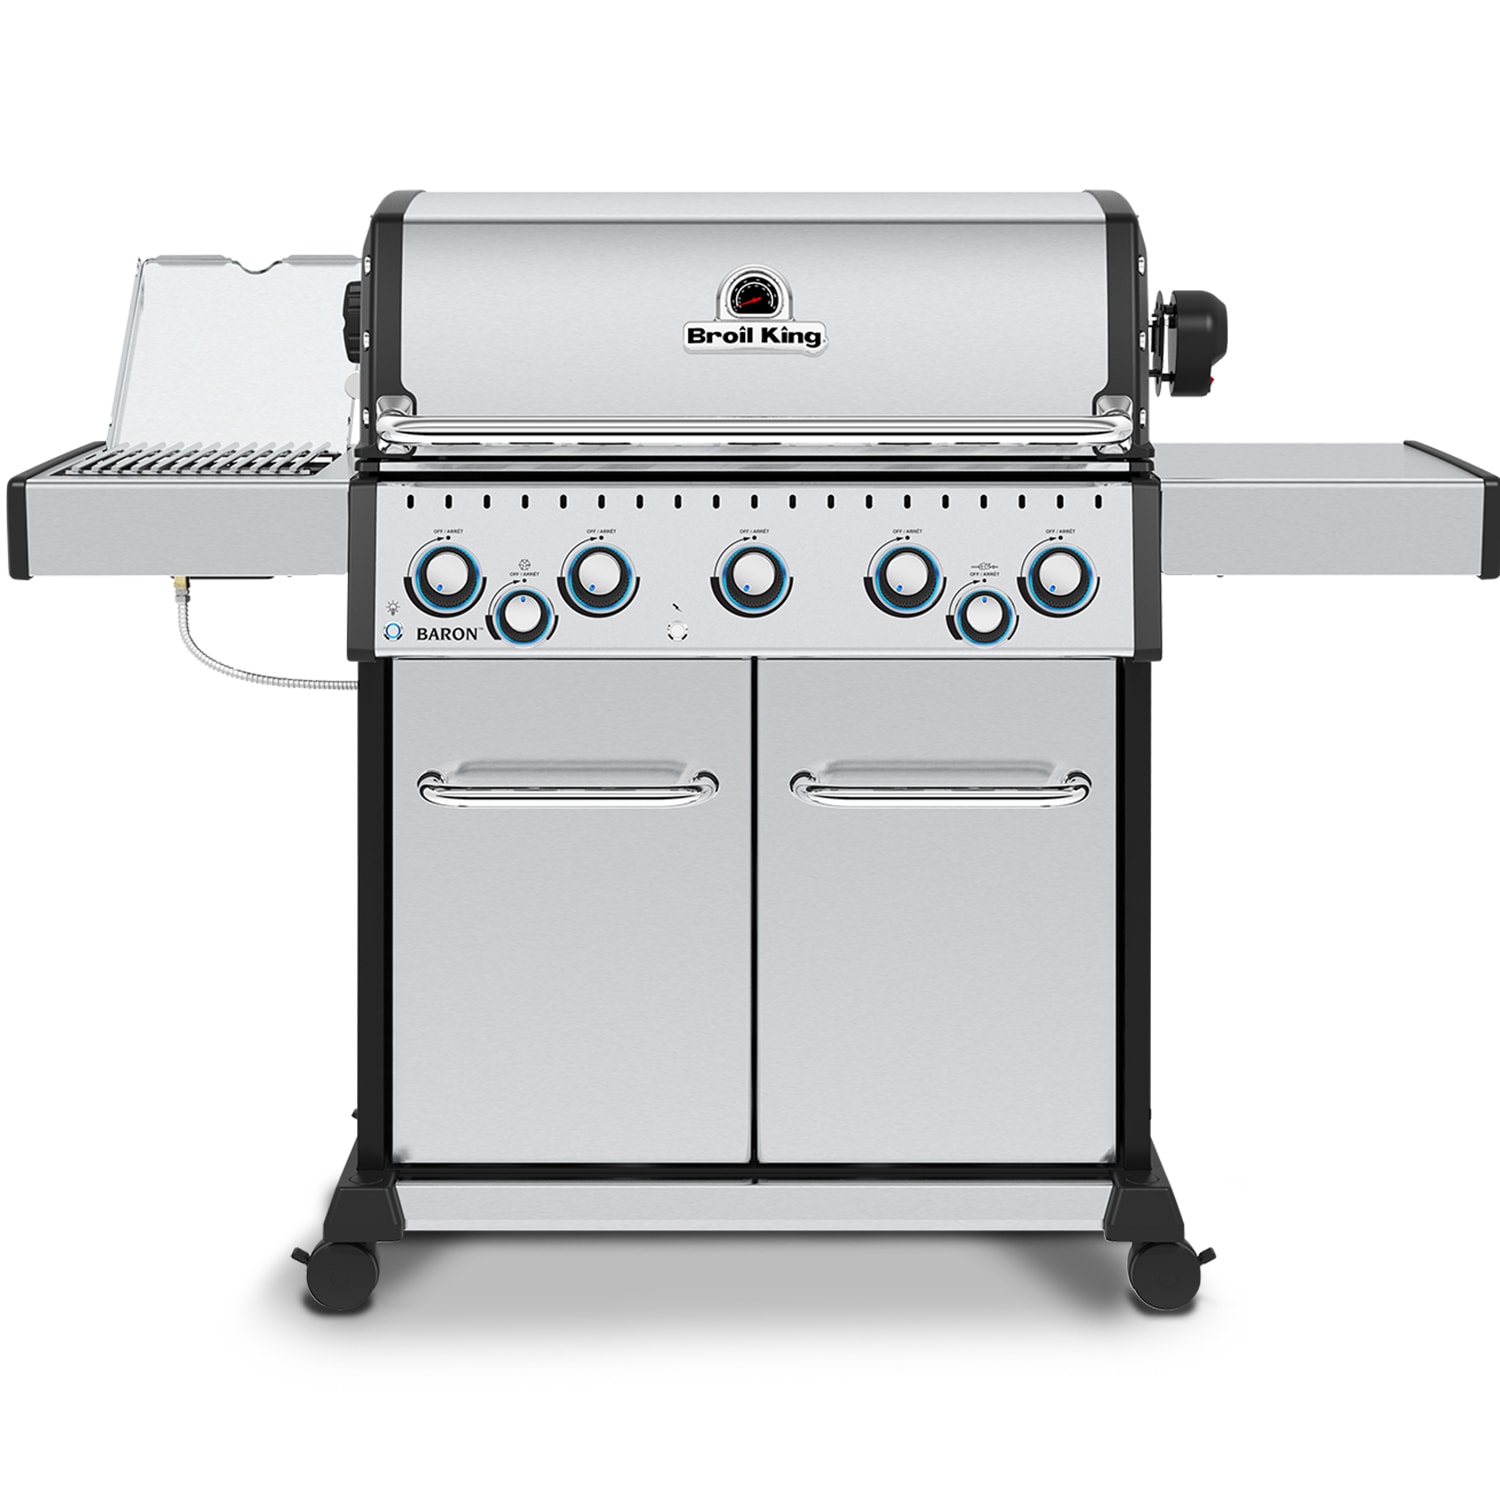 Broil King Baron Steel 5-Burner Liquid Propane Infrared Gas with 1 Side Burner in the Gas Grills department at Lowes.com